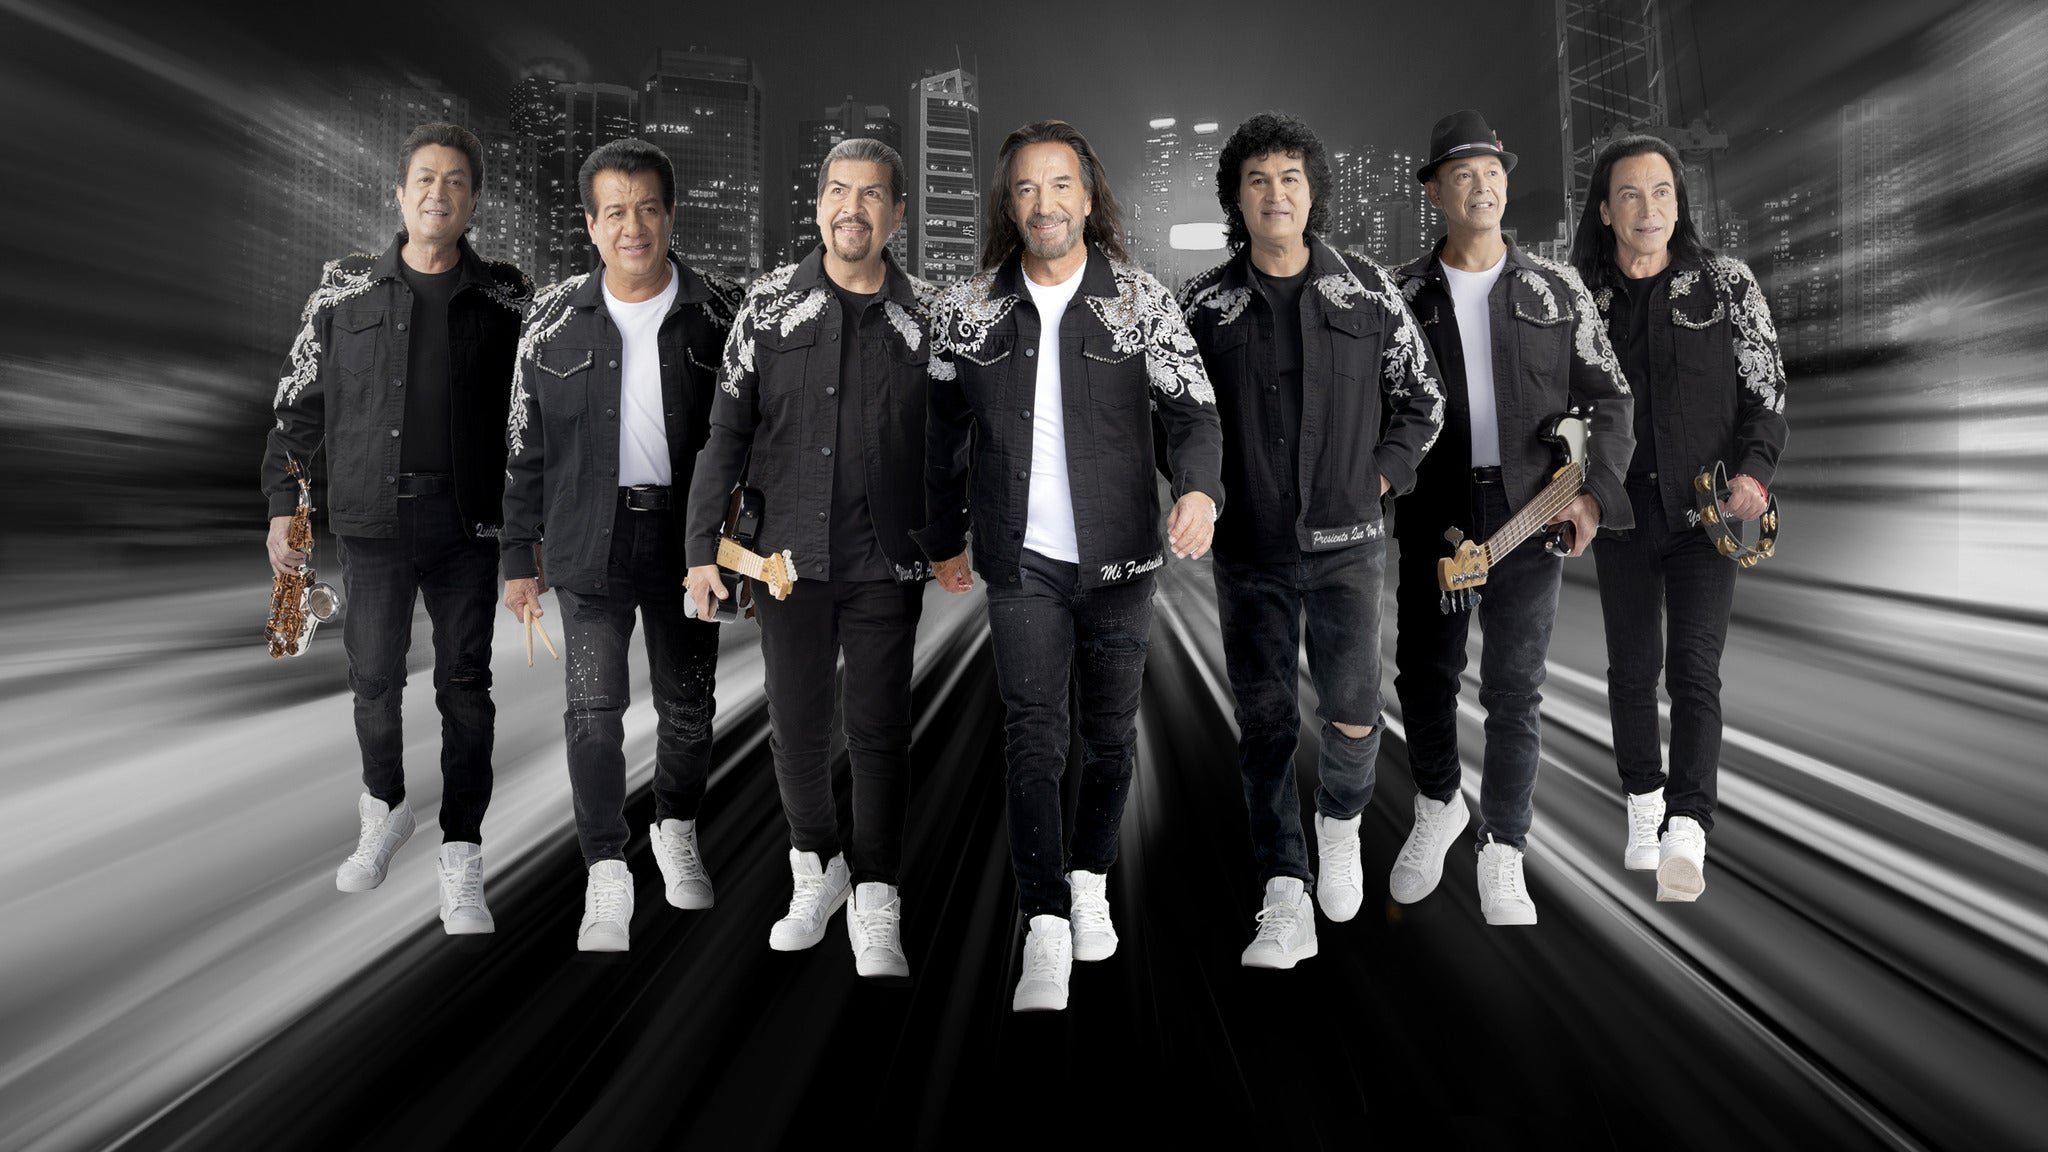 Los Bukis Concert | Live Stream, Date, Location and Tickets info